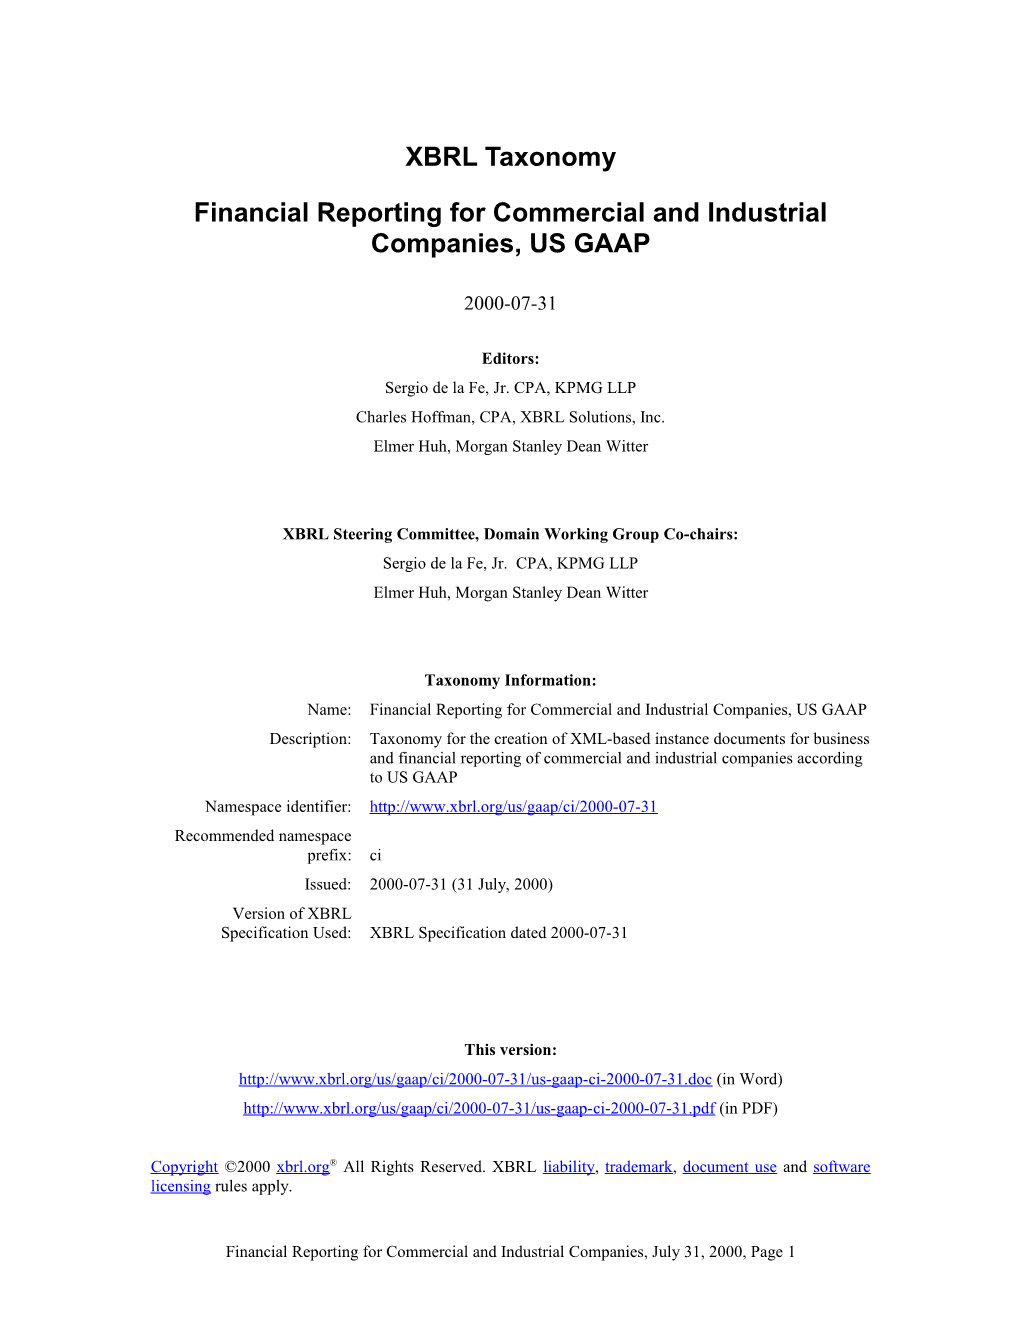 Financial Reporting for Commercial and Industrial Companies, US GAAP